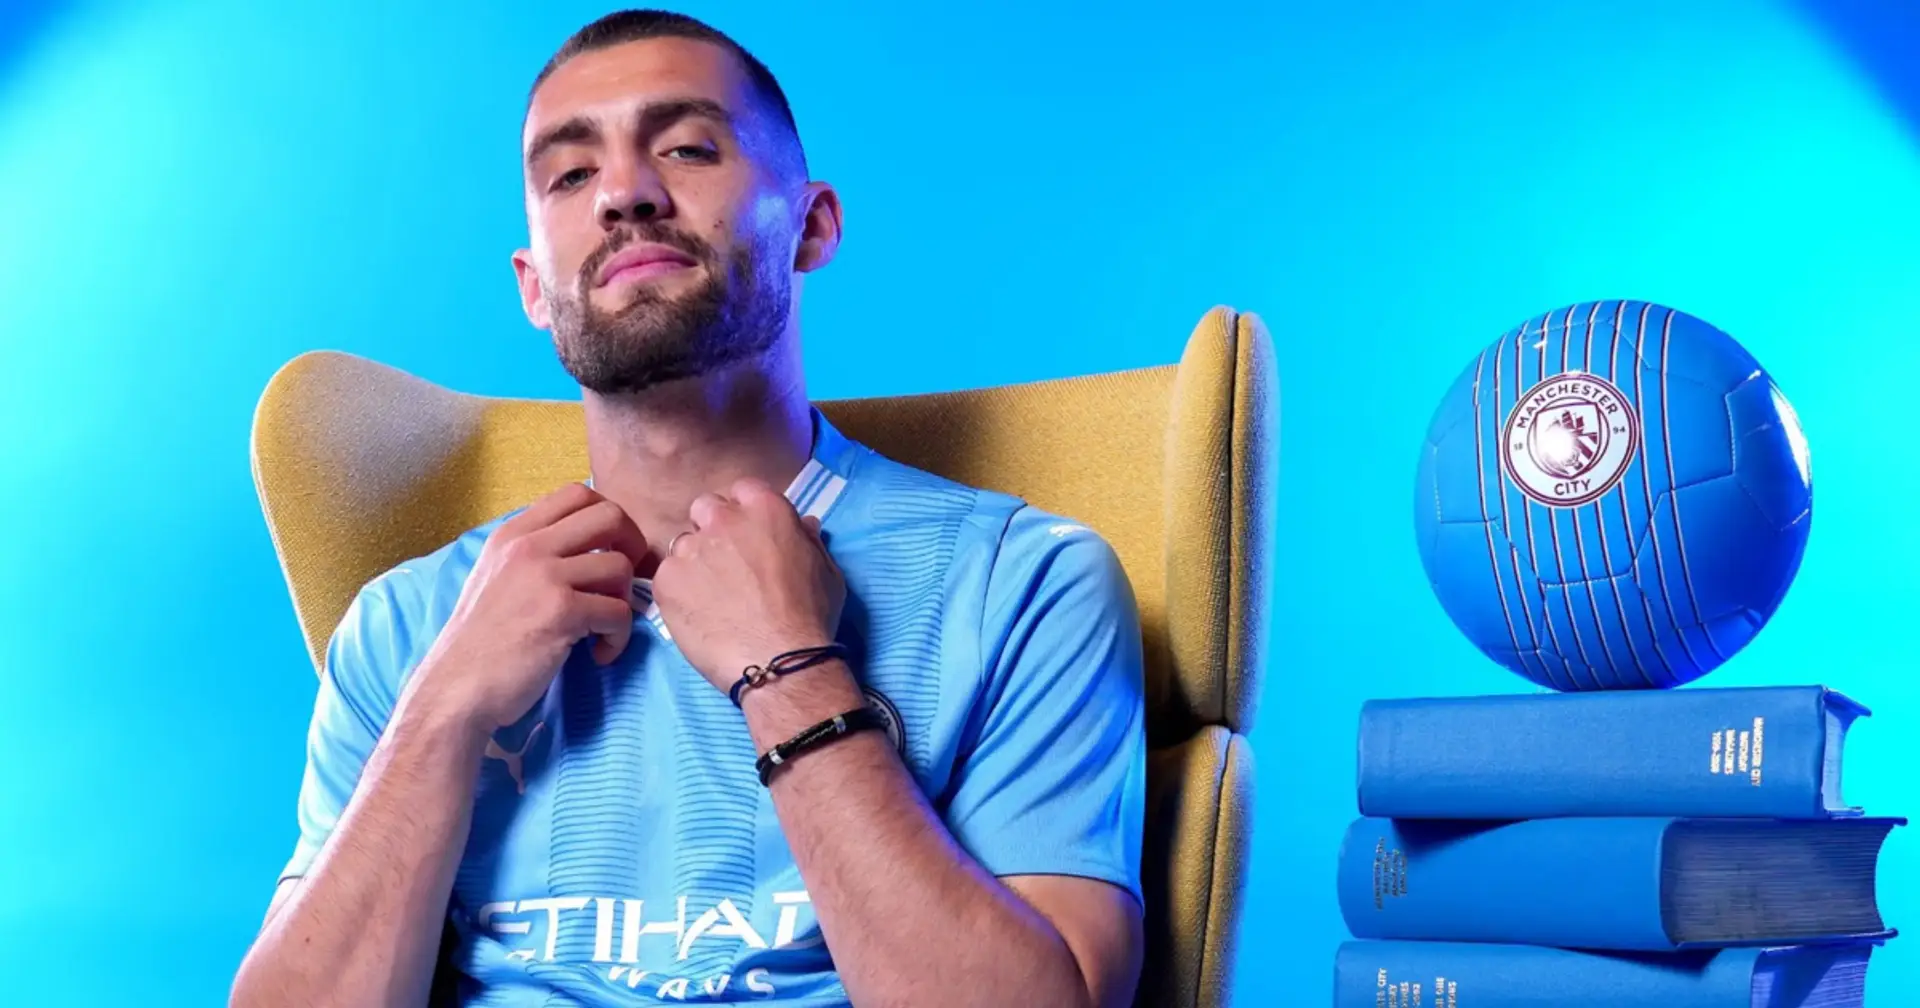 'Even at my age you can still improve': Mateo Kovacic reveals why he came to Man City 